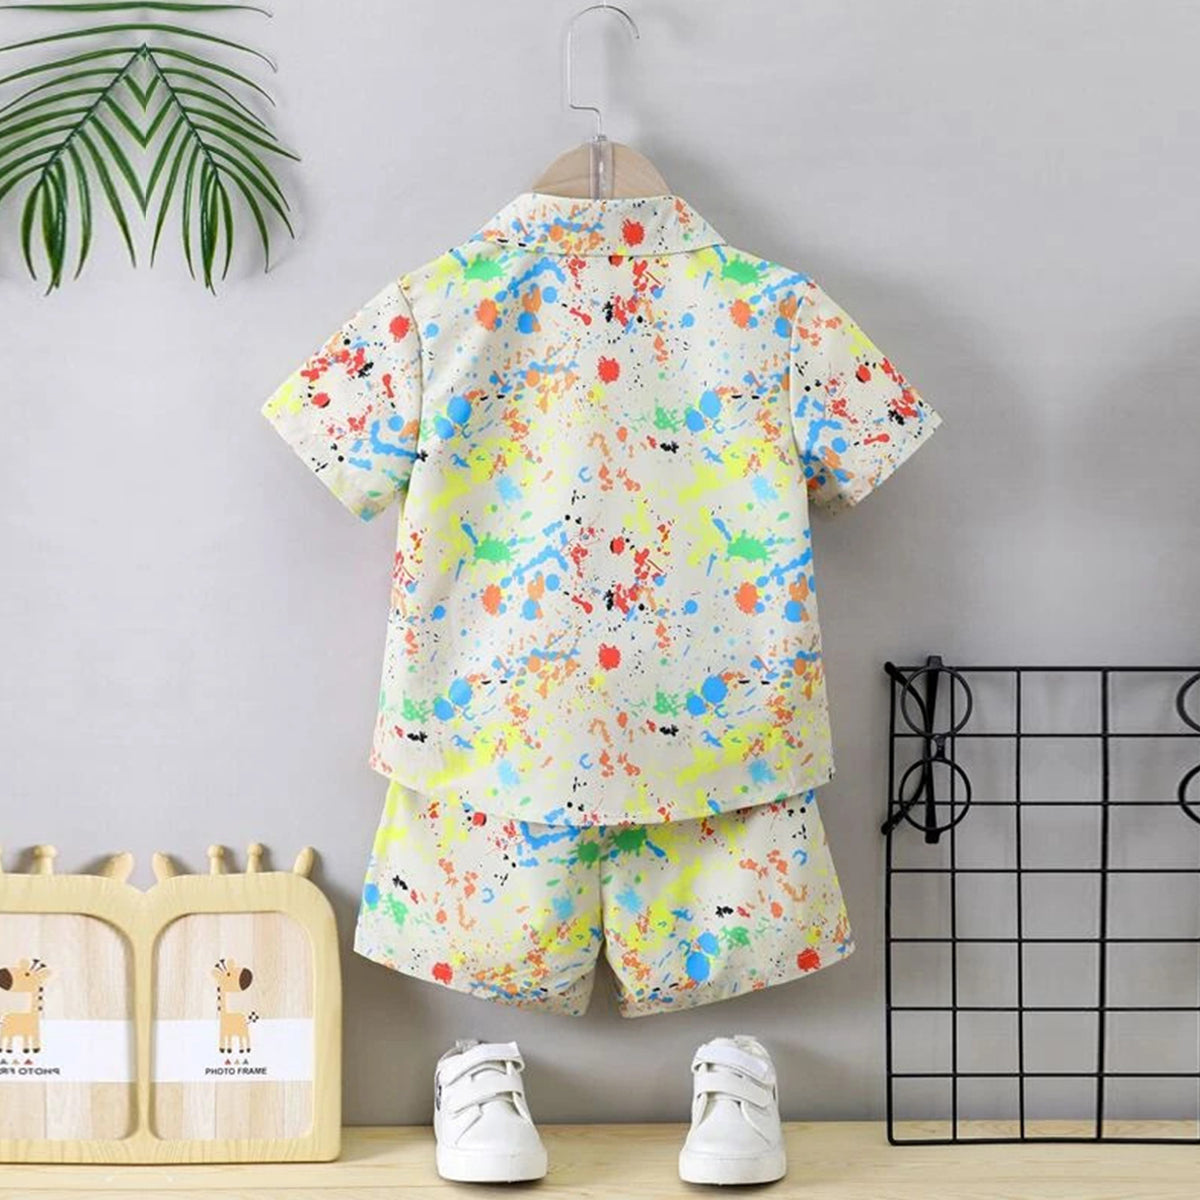 Venutaloza Baby Set Rainbow & Apricot-Colored (Combo Pack Of 2) Shirt & Shorts Without tee Two Piece Set For Boy & Girls.